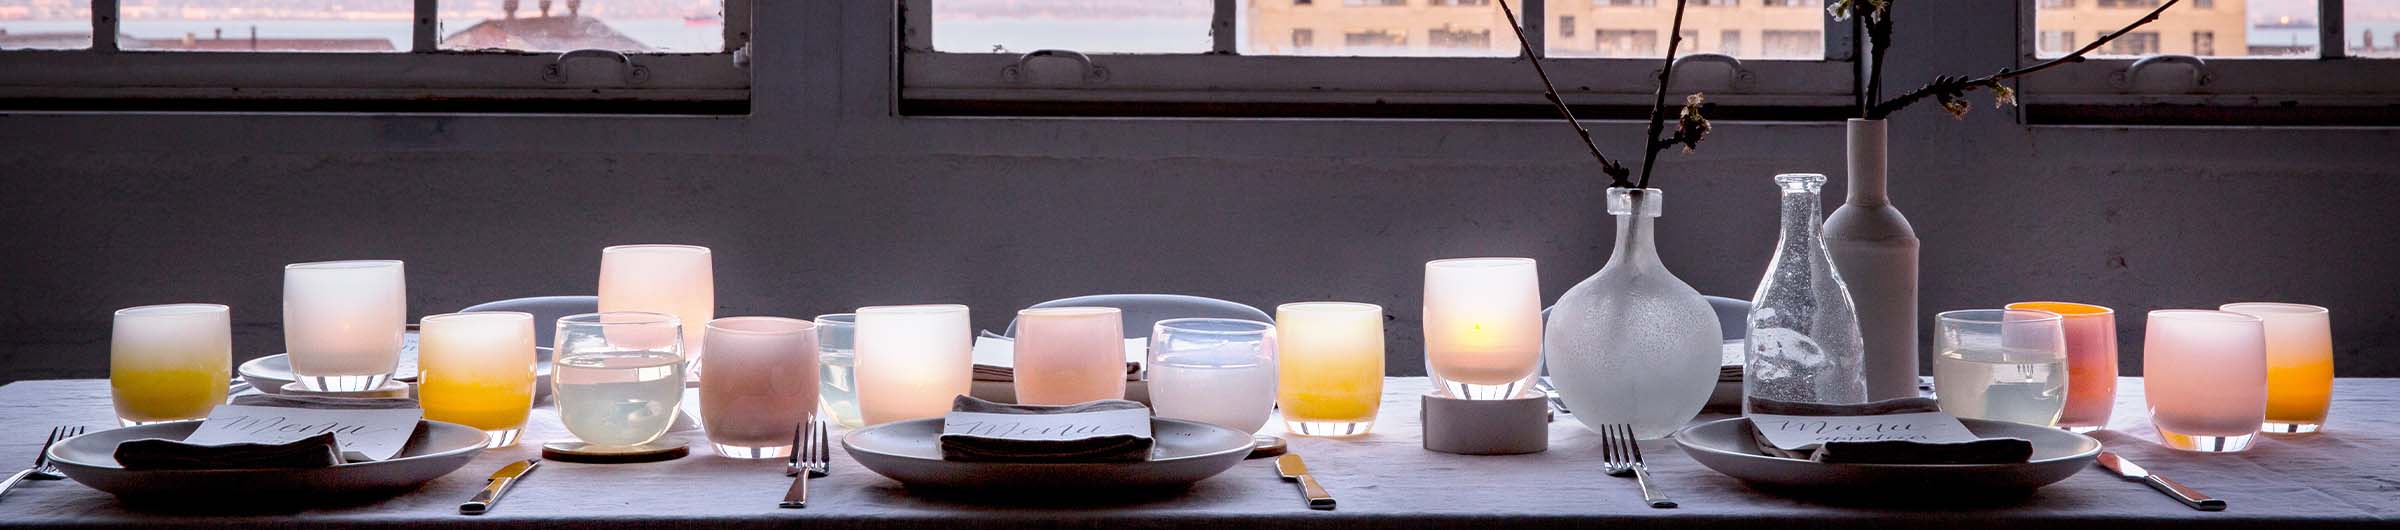 table set with hand-blown glass votive candle holders, illuminated by the sunset on a bay.